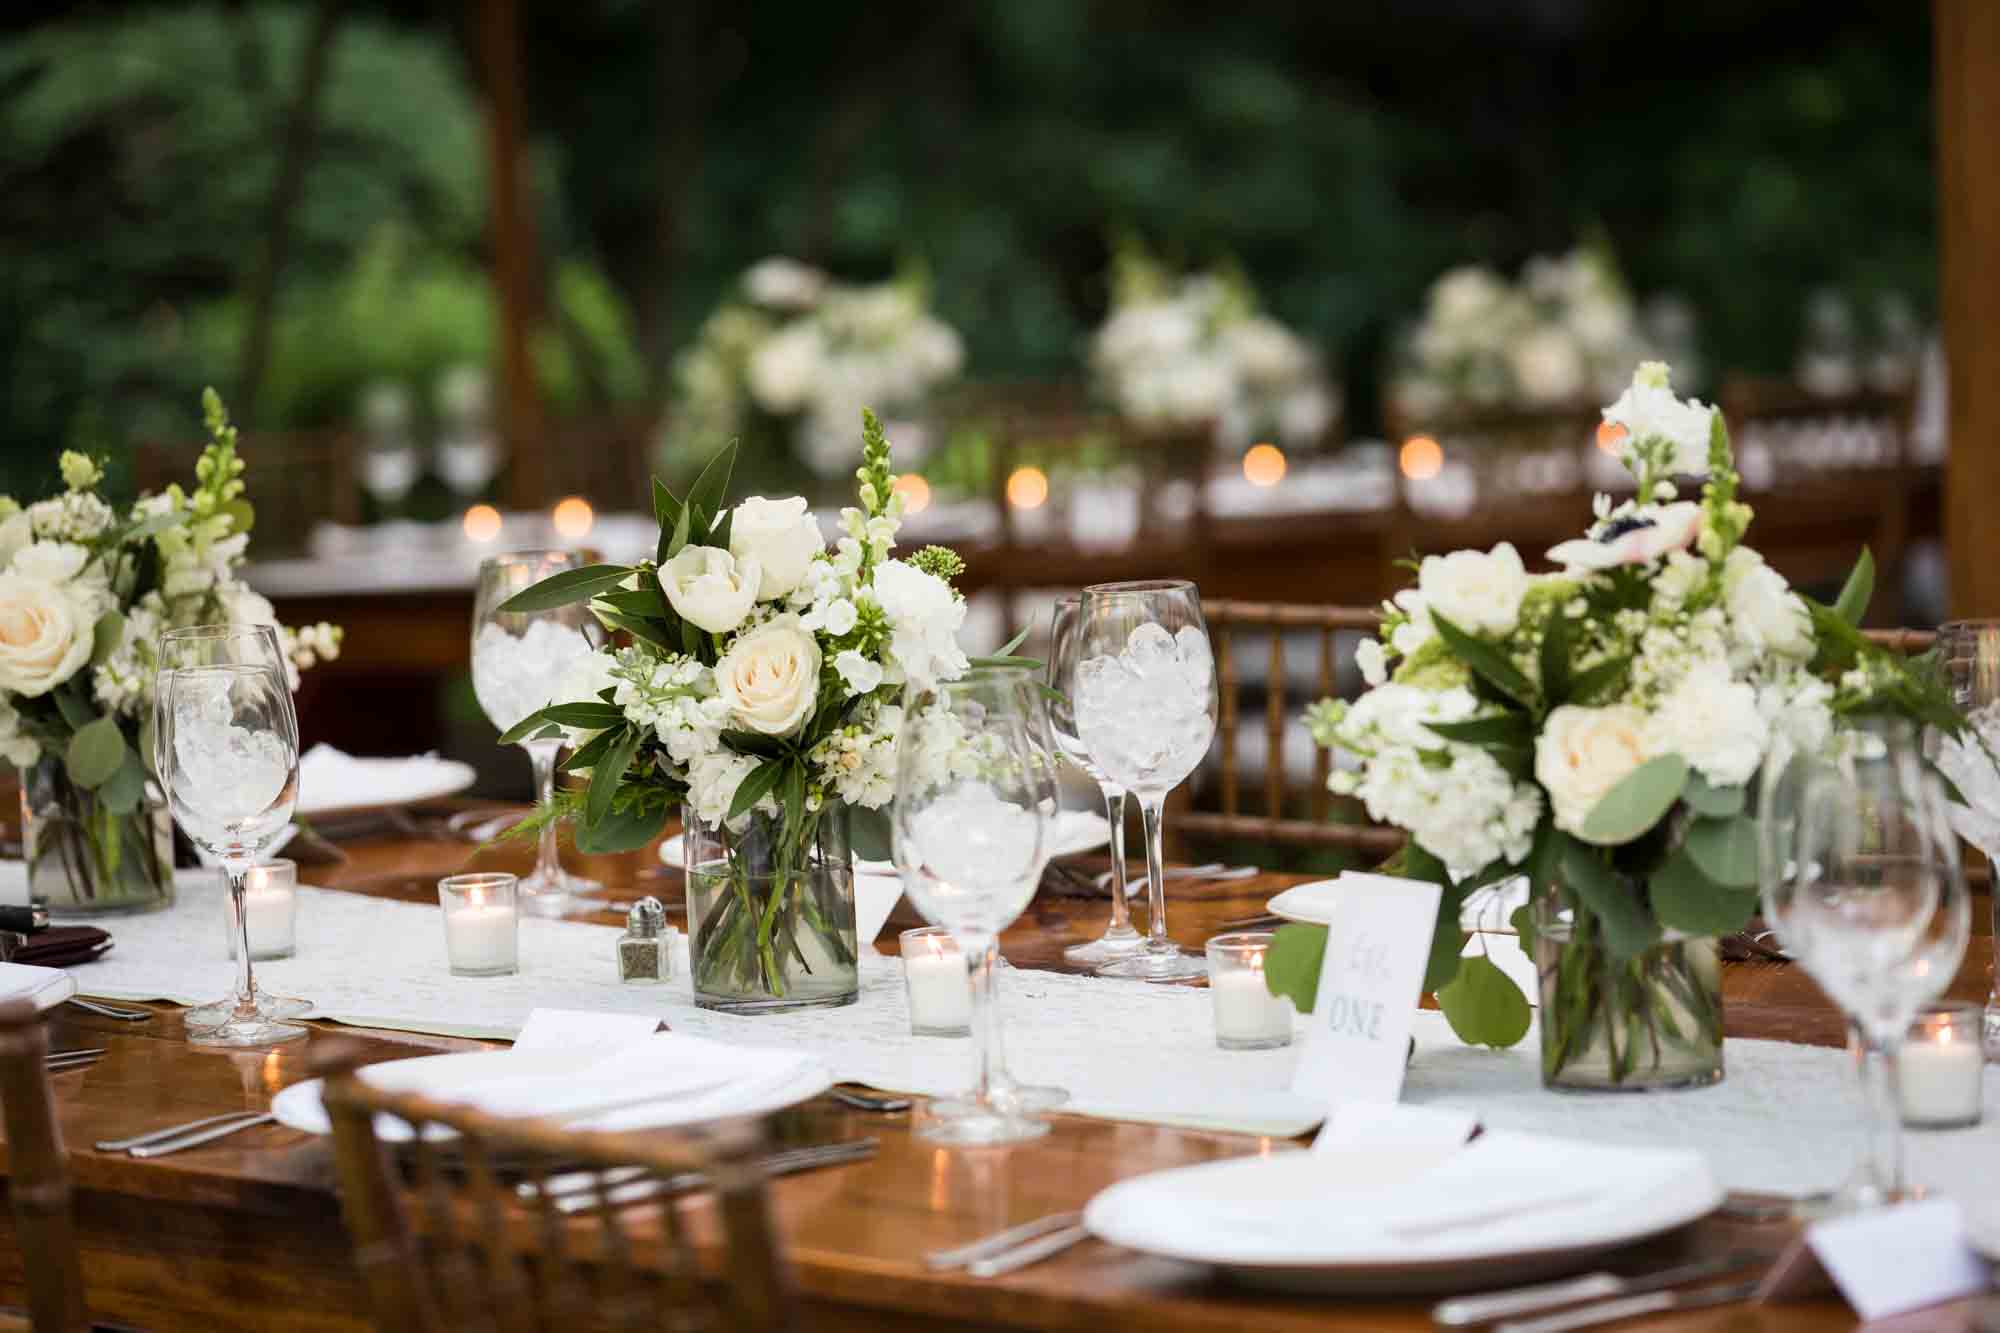 Table set with white flower bouquets for an article on backyard wedding tips